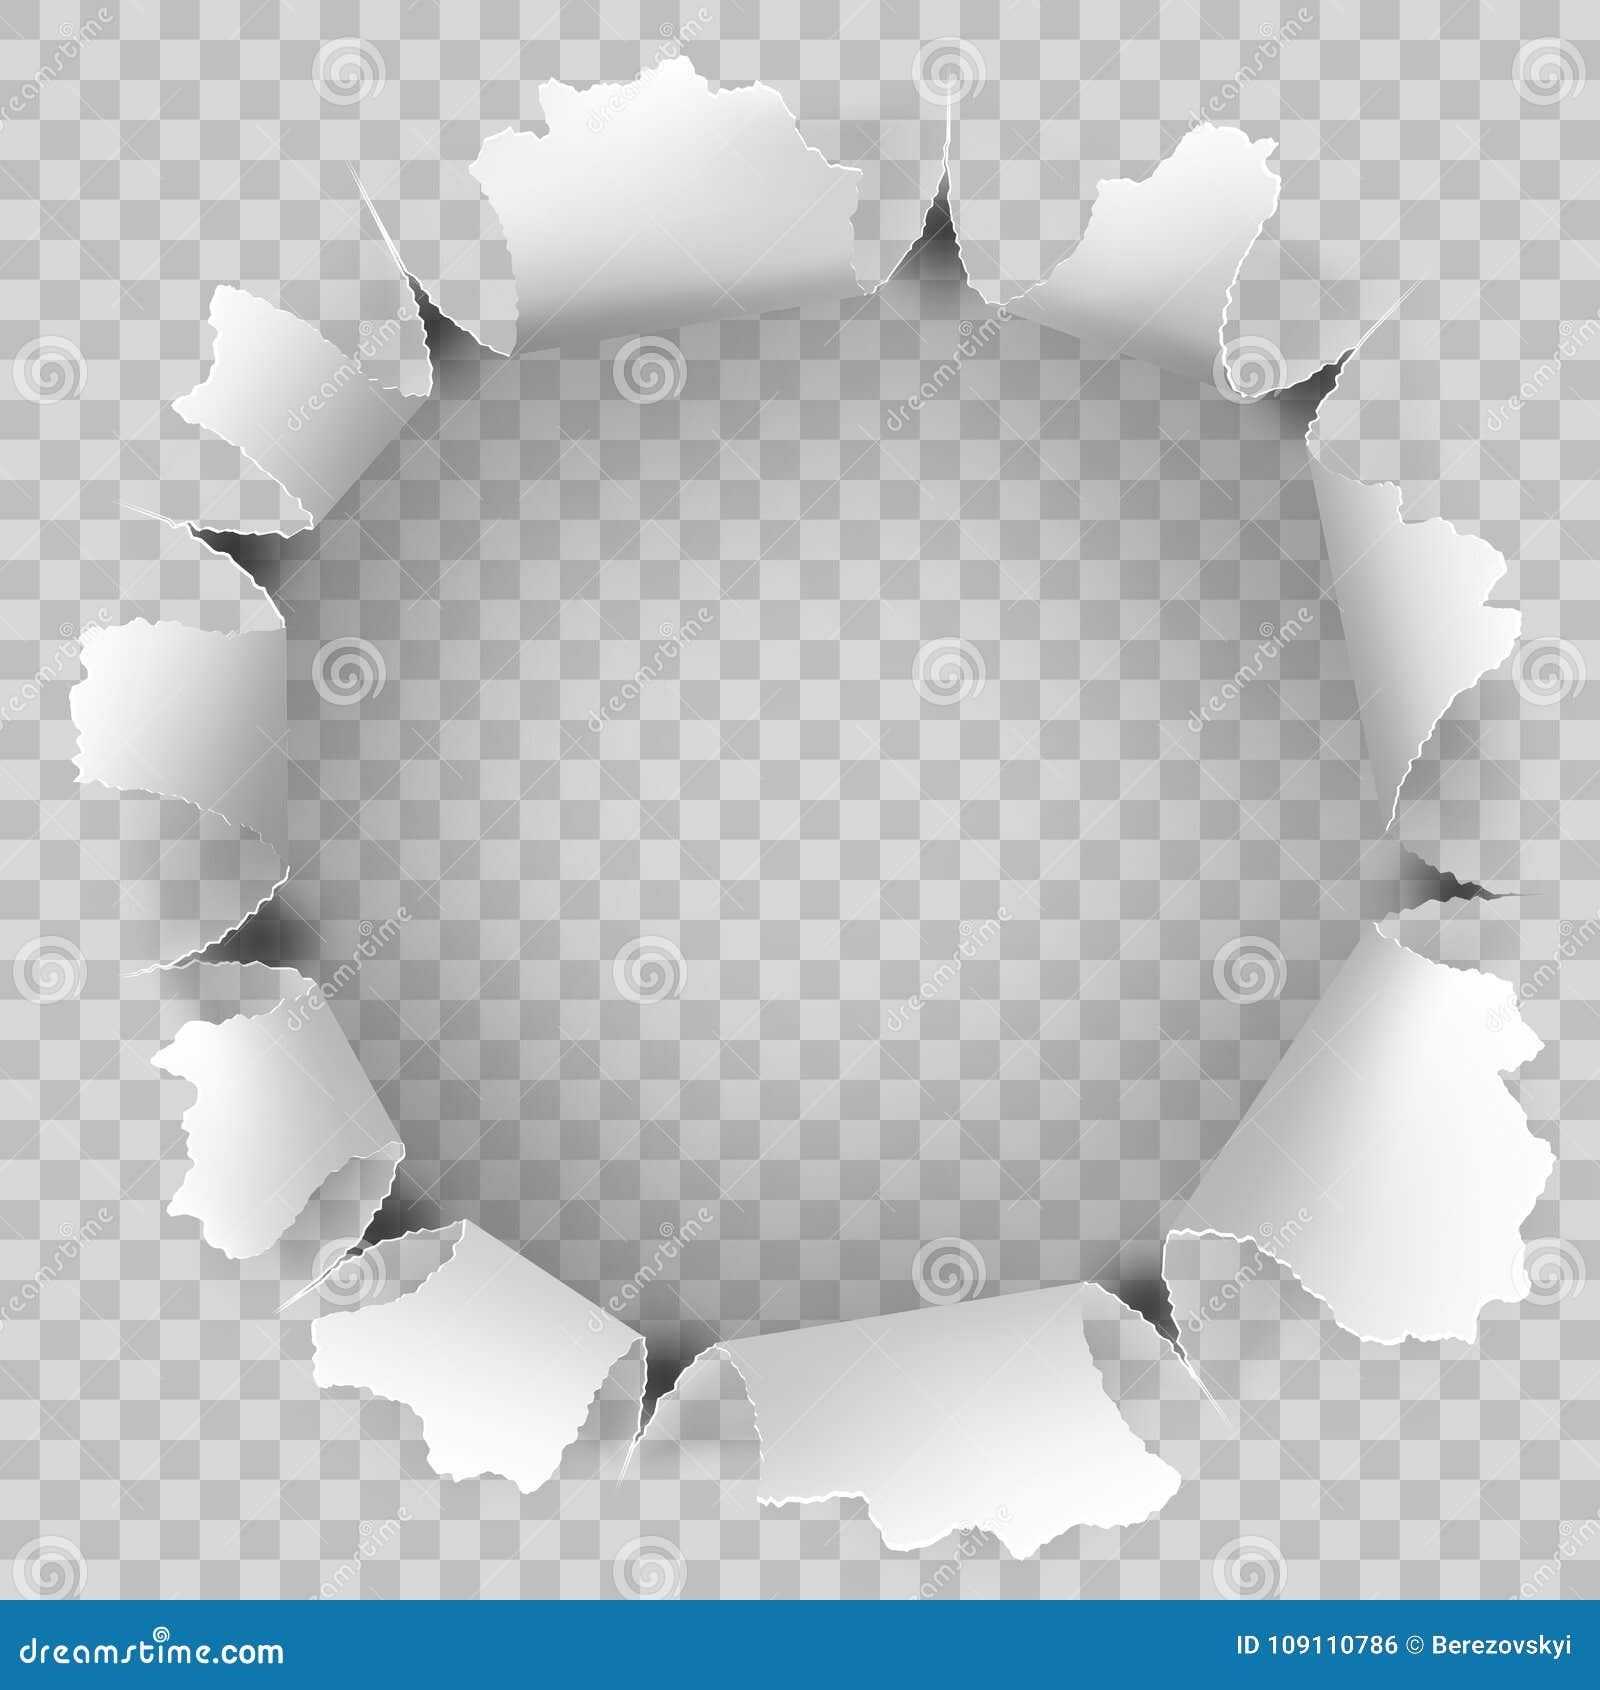 Ragged hole torn in ripped paper on transparent Vector Image